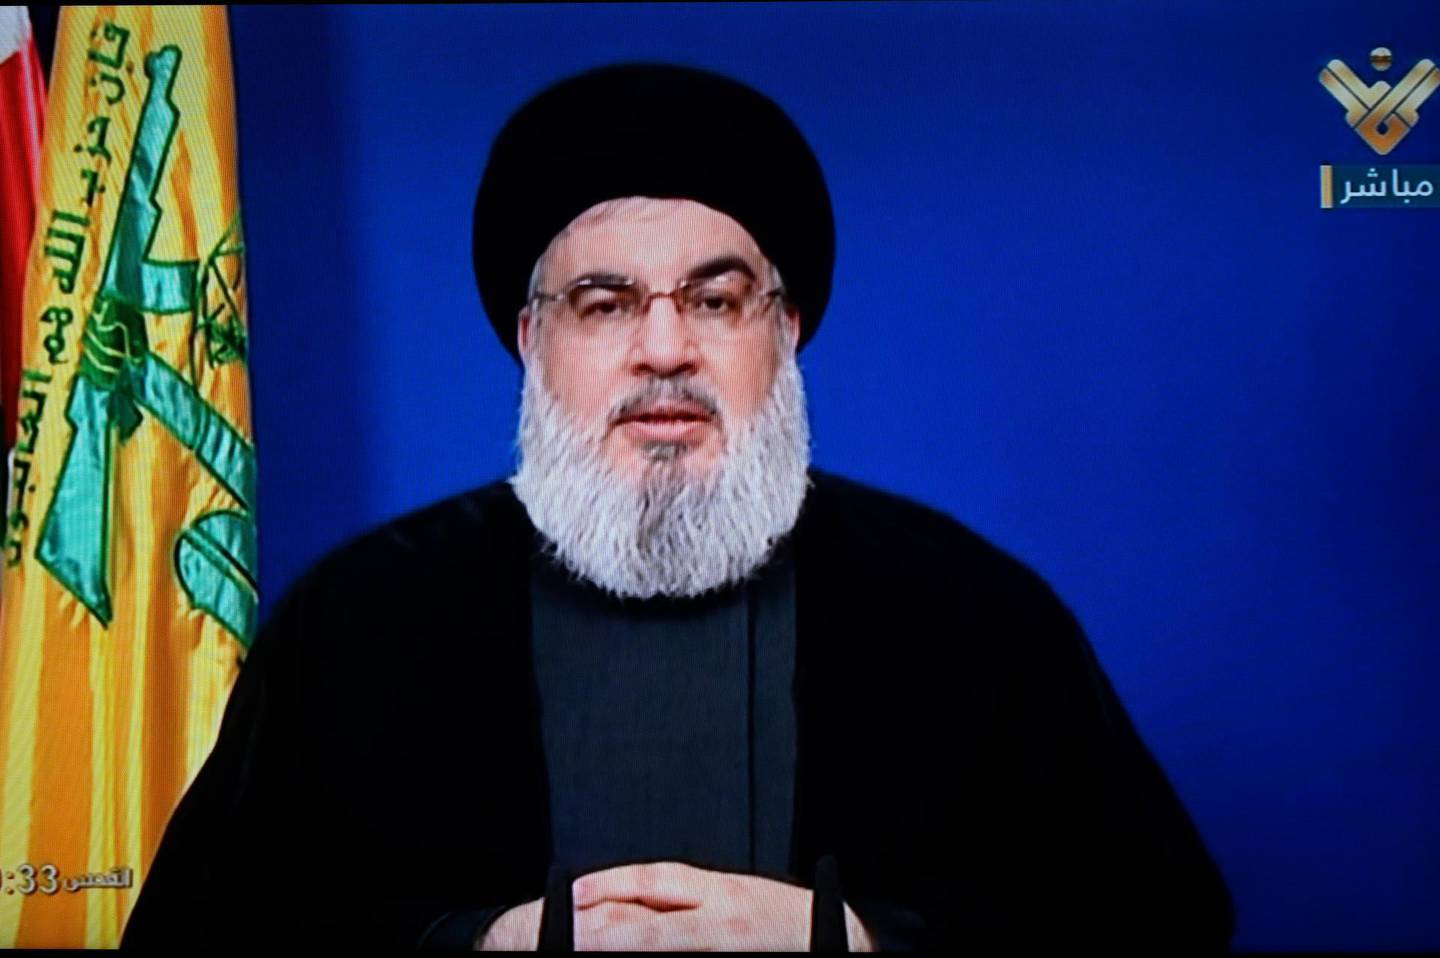 epa08706493 A grab photo made from Hezbollah's al-Manar TV shows Hezbollah leader Sayyed Hassan Nasrallah giving a speech in Beirut, Lebanon, 29 September 2020. Reports state Sayyed Nasrallah hits back at Israeli Prime Minister Benjamin Netanyahu who claimed that Hezbollah allegedly has a missile factory south of Beirut and said Lebanese media outlets are called upon to tour in the area in a bid to refute Netanyahu's lies.  EPA/WAEL HAMZEH HANDOUT  HANDOUT EDITORIAL USE ONLY/NO SALES